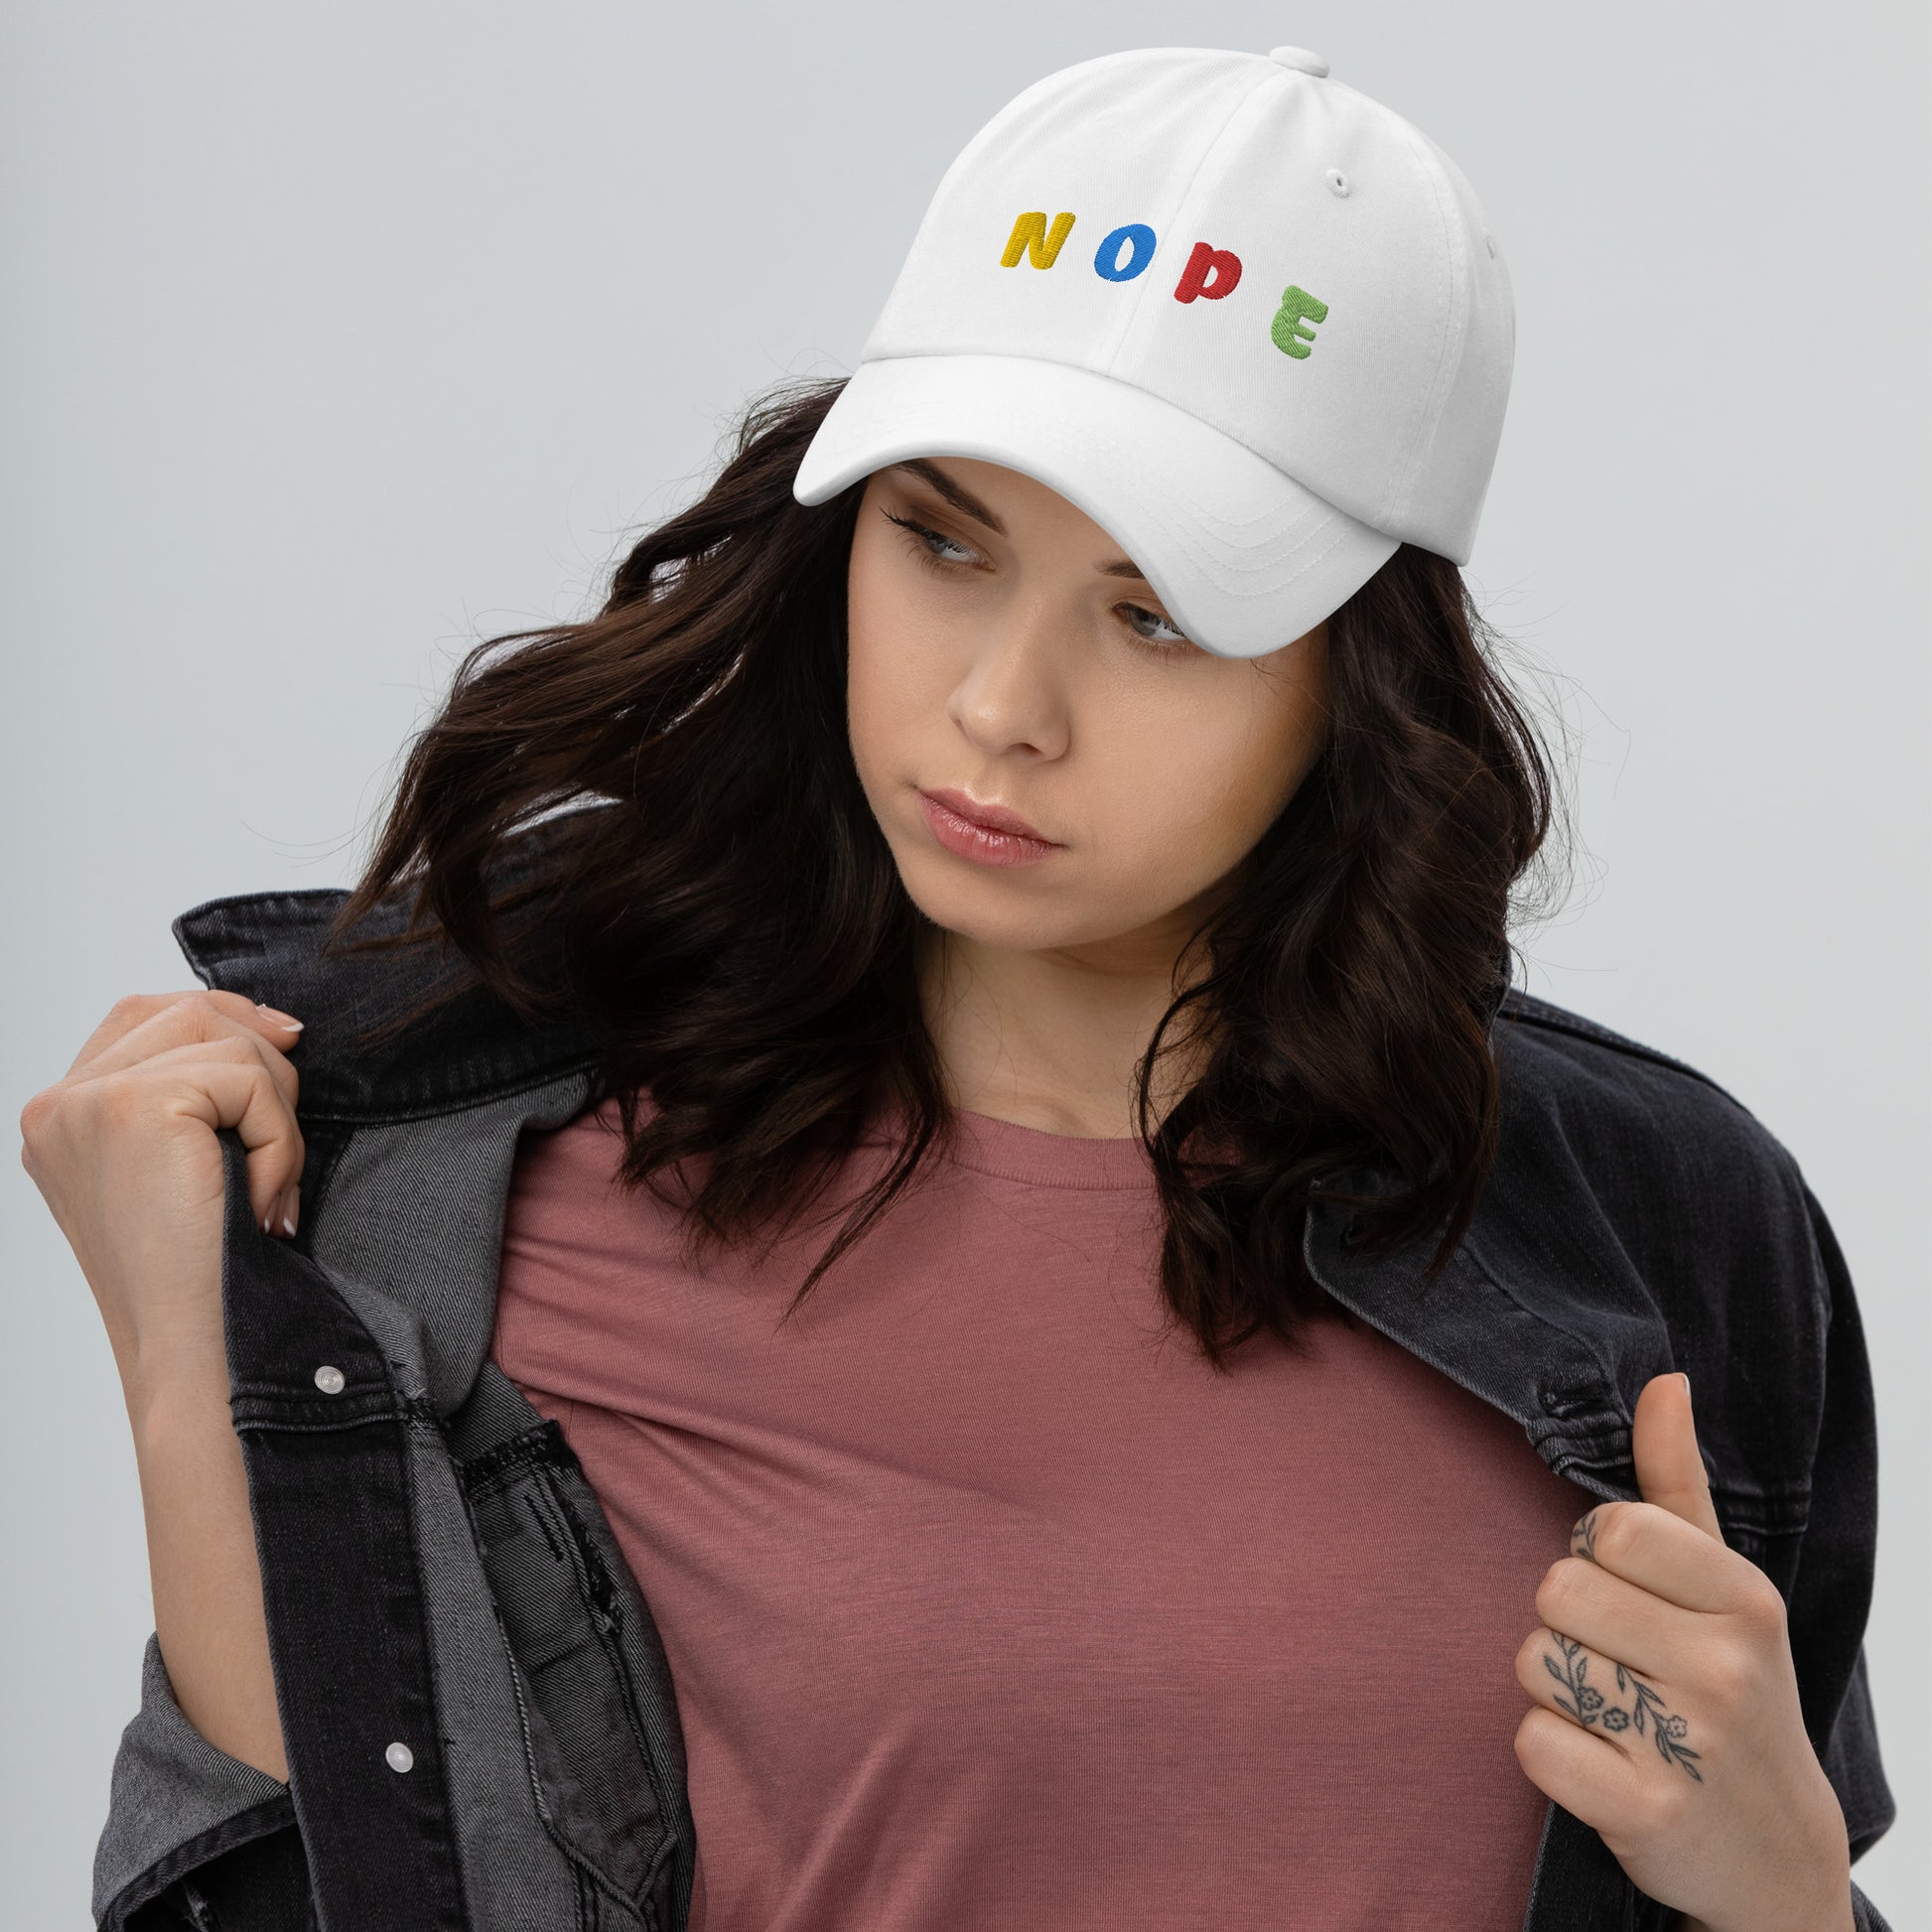 lady wearing white hat with "NOPE" written on front